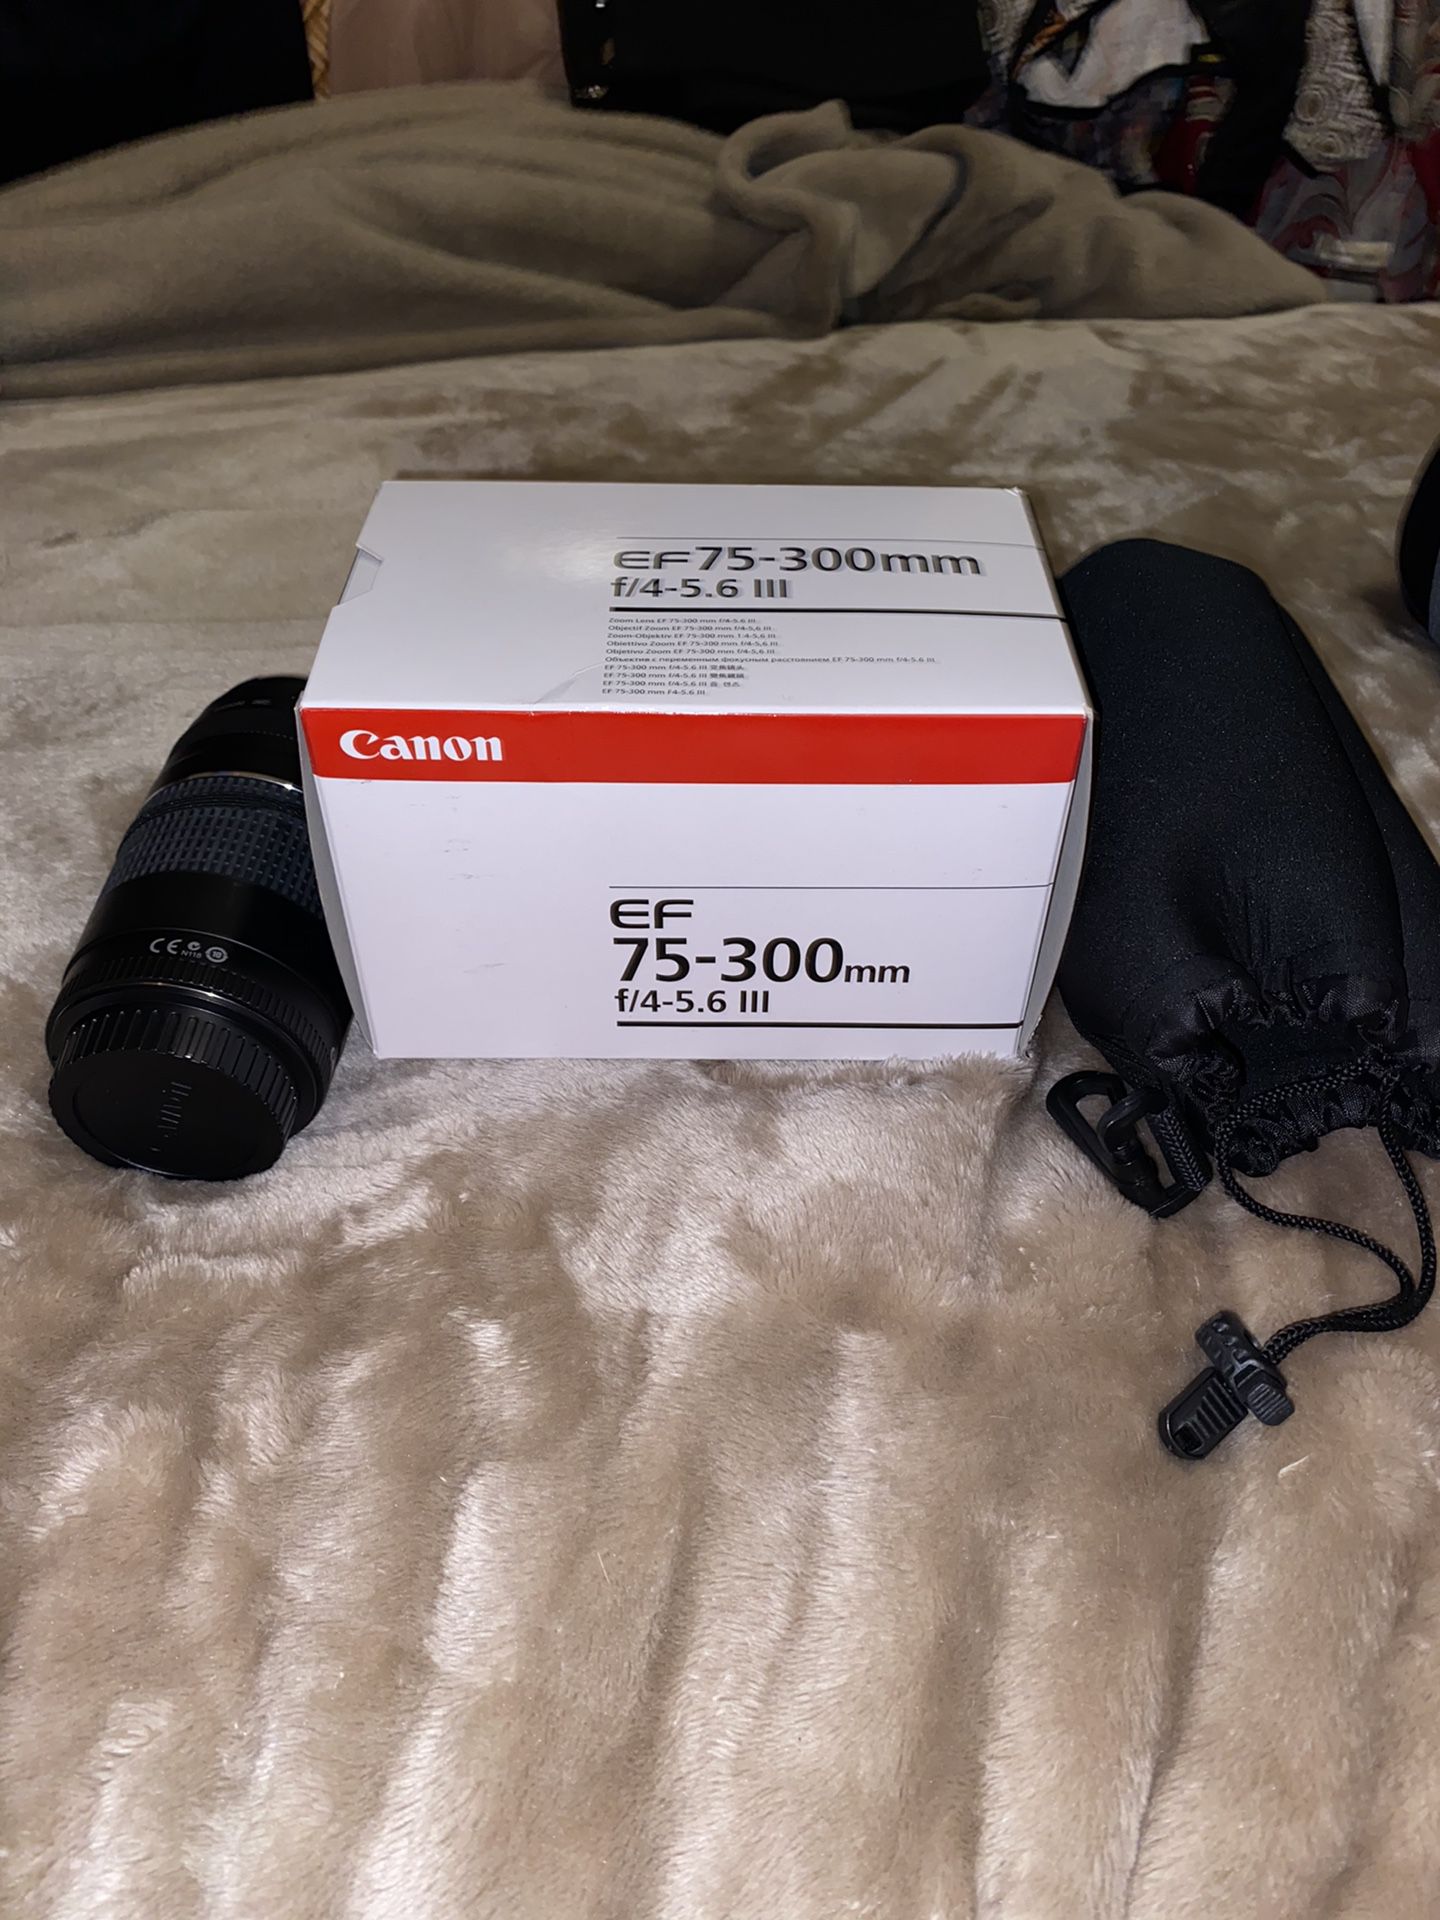 - in Sale EF f/4-5.6 Cameras Zoom Telephoto Canon Lens for for III OfferUp Canon SLR FL Plantation, 75-300mm